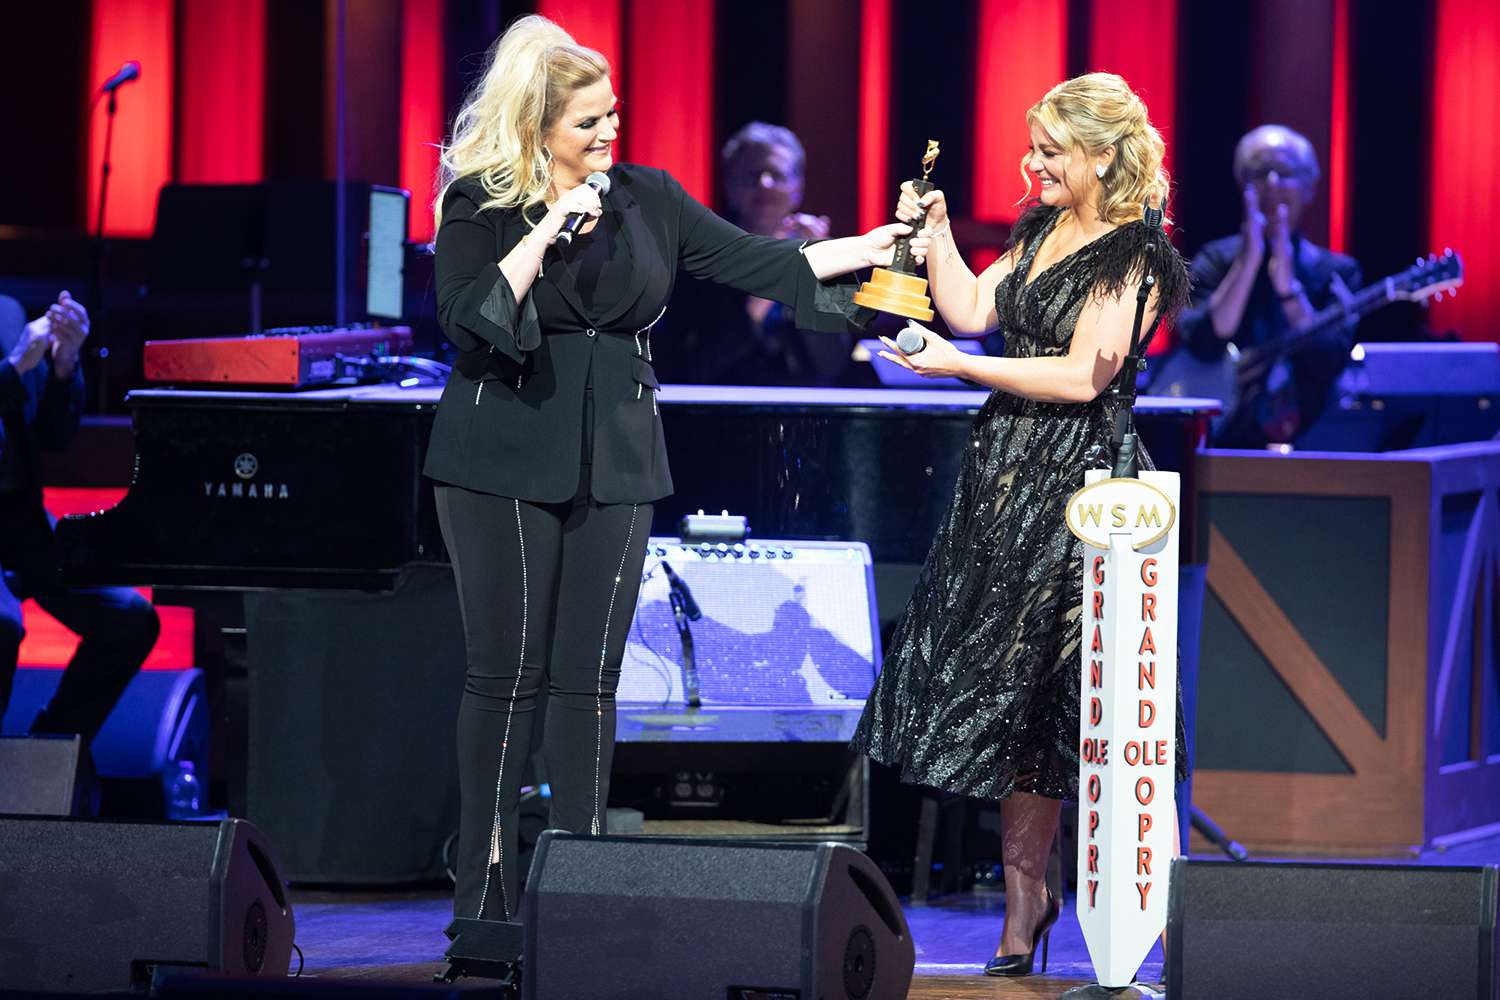 Trisha Yearwood officially welcomes Lauren Alaina as the newest member of the Grand Ole Opry